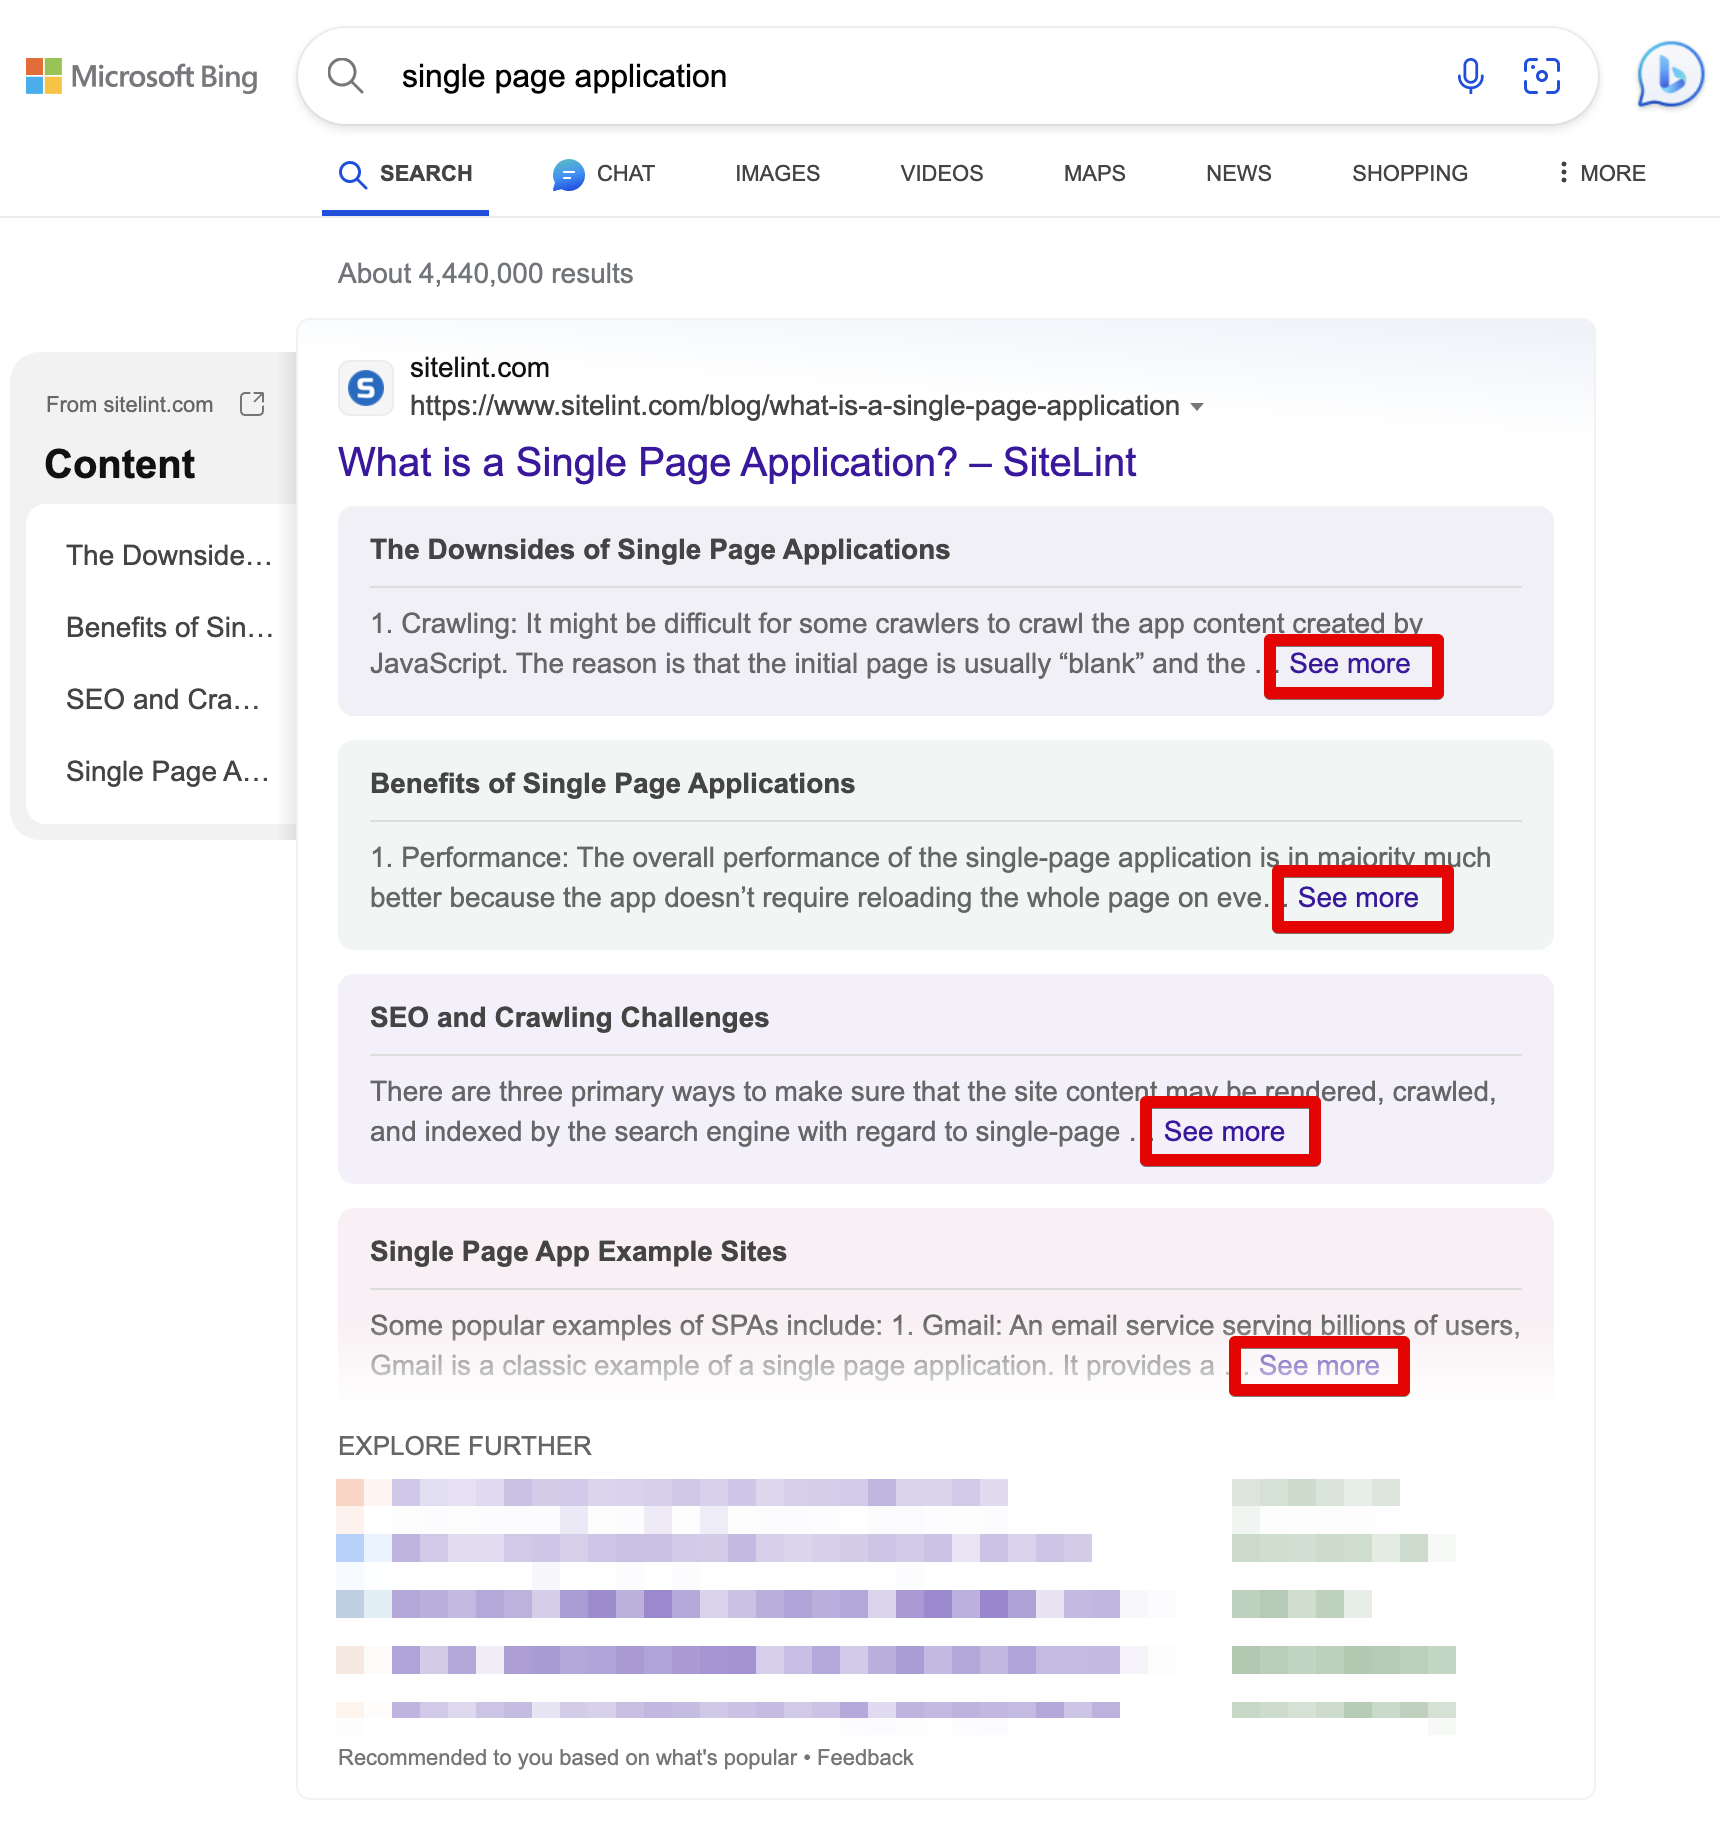 Bing SERP snippet with links "See more".